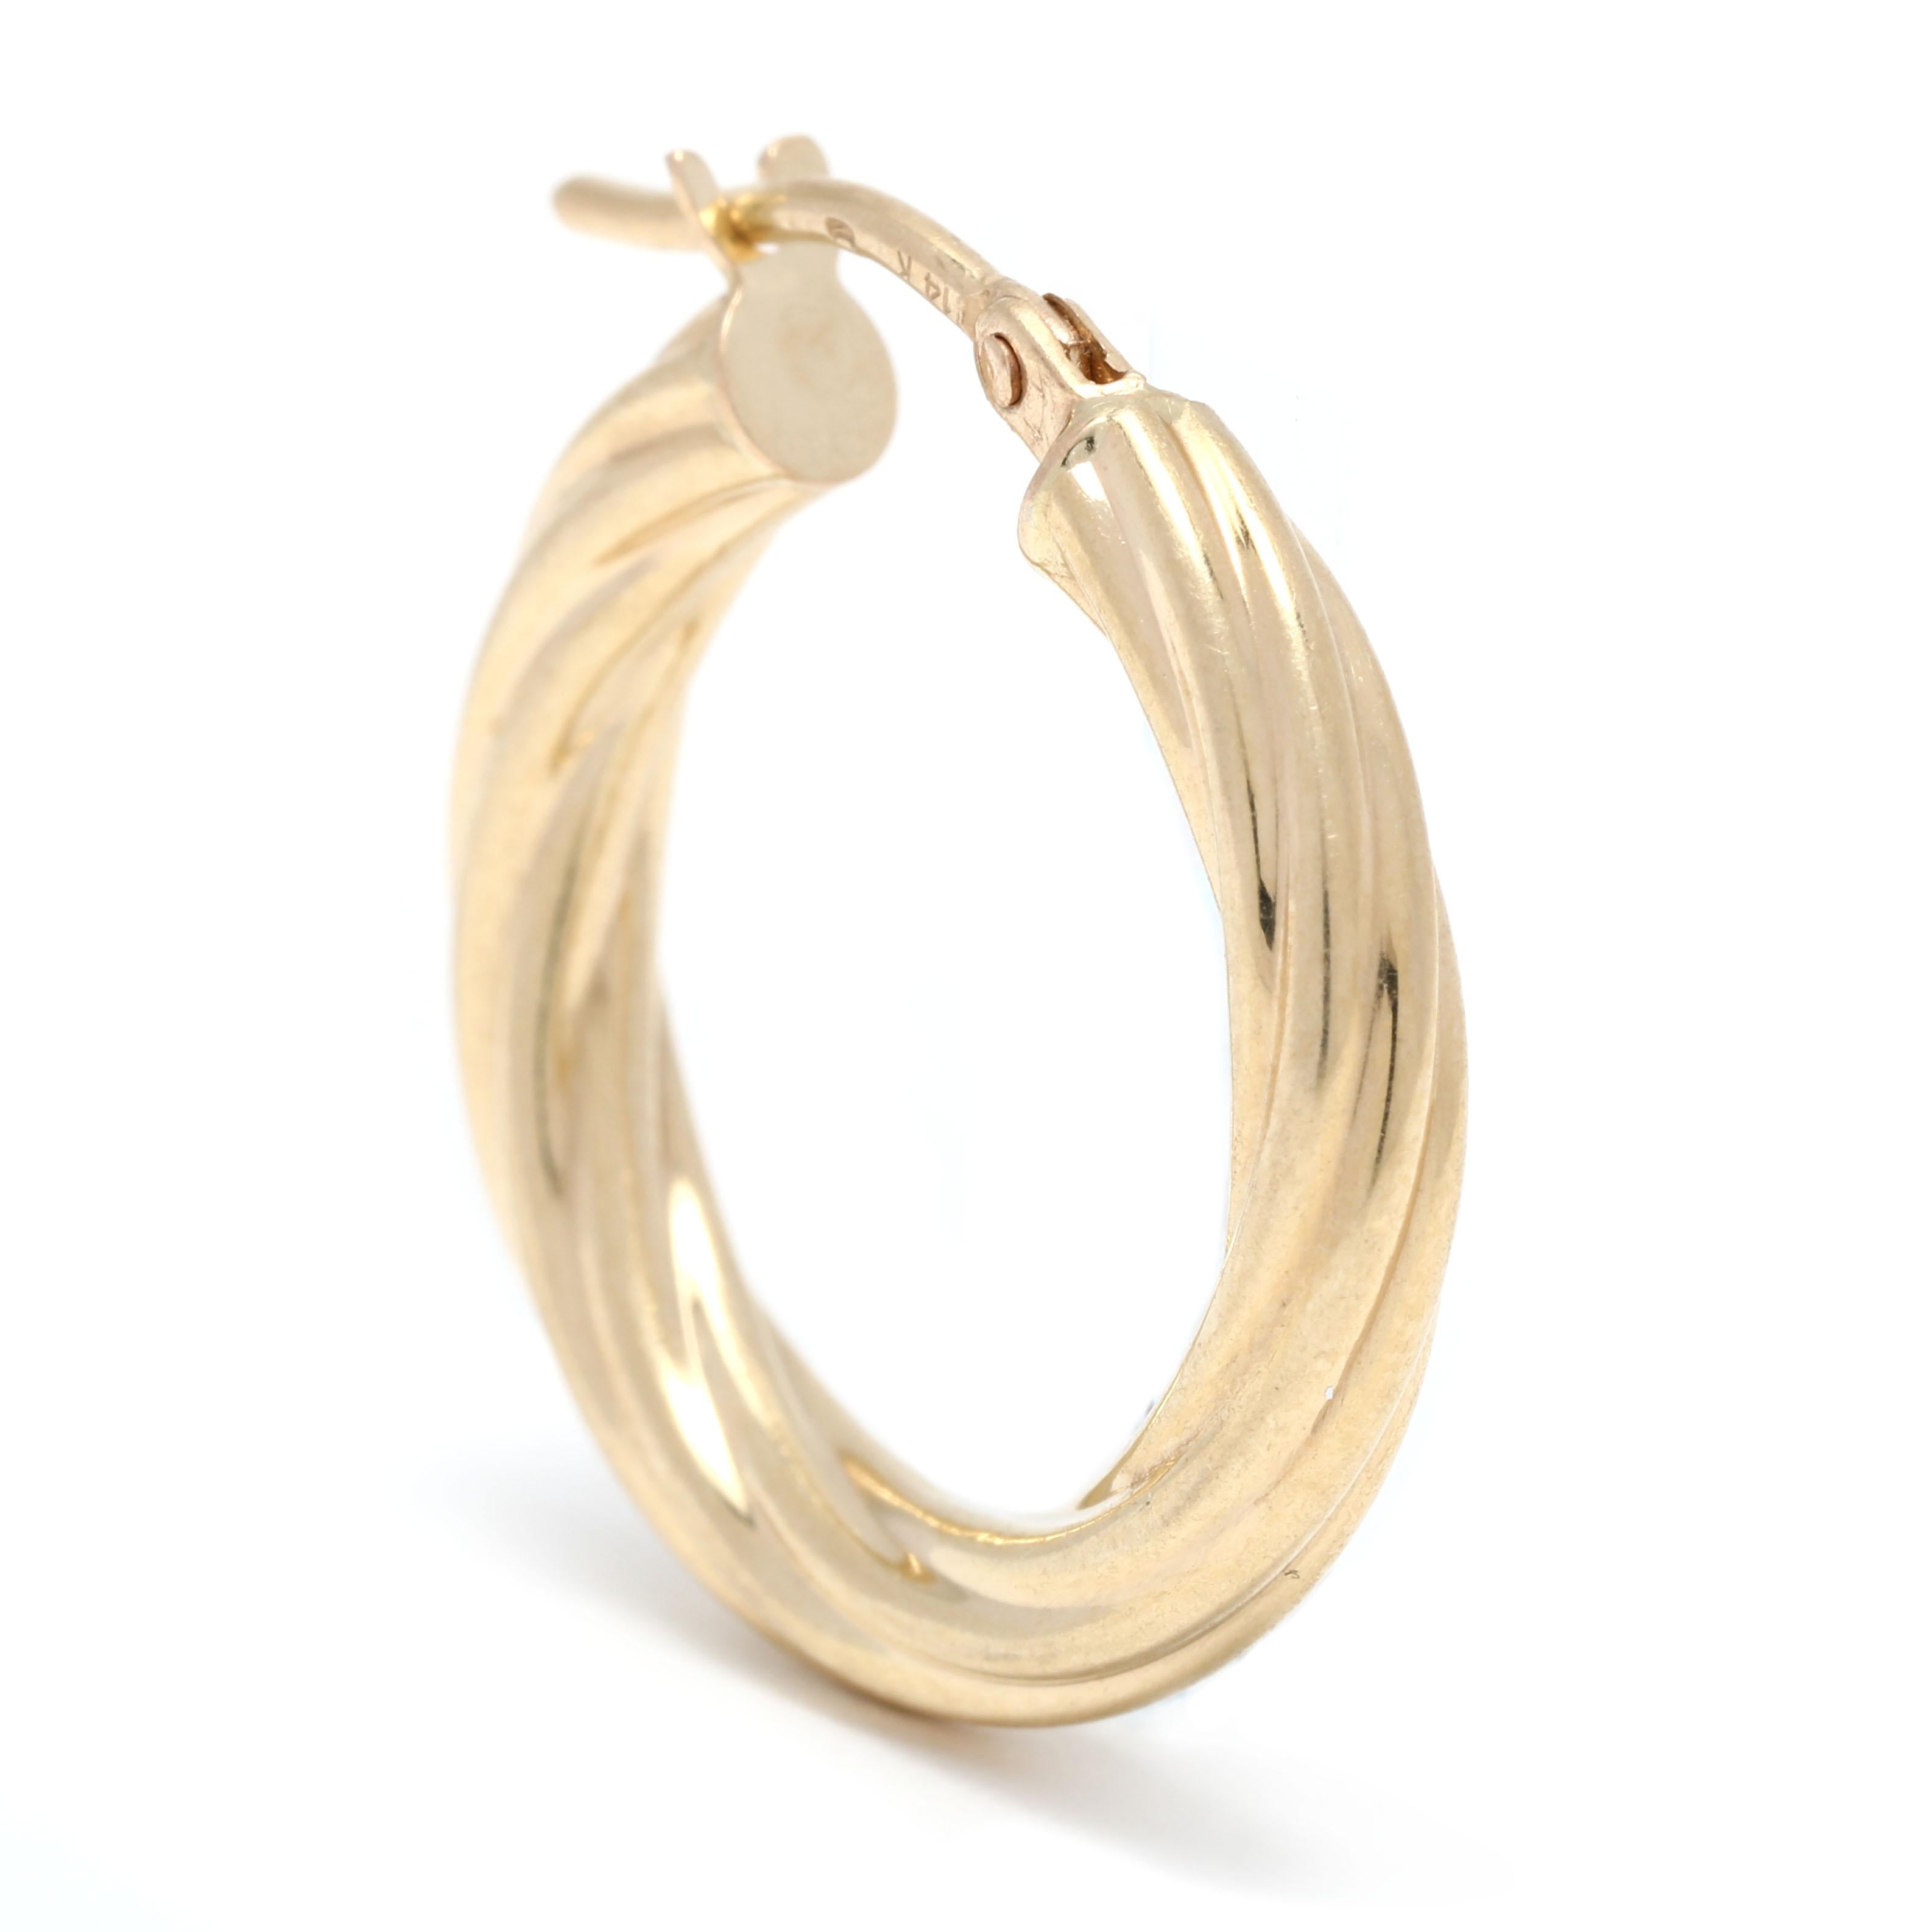 These small gold twist hoop earrings are perfect for everyday wear! Crafted in 14K yellow gold, these earrings feature a simple design with a beautiful twist. At a length of 3/4 inch, these earrings are small and dainty, making them the perfect